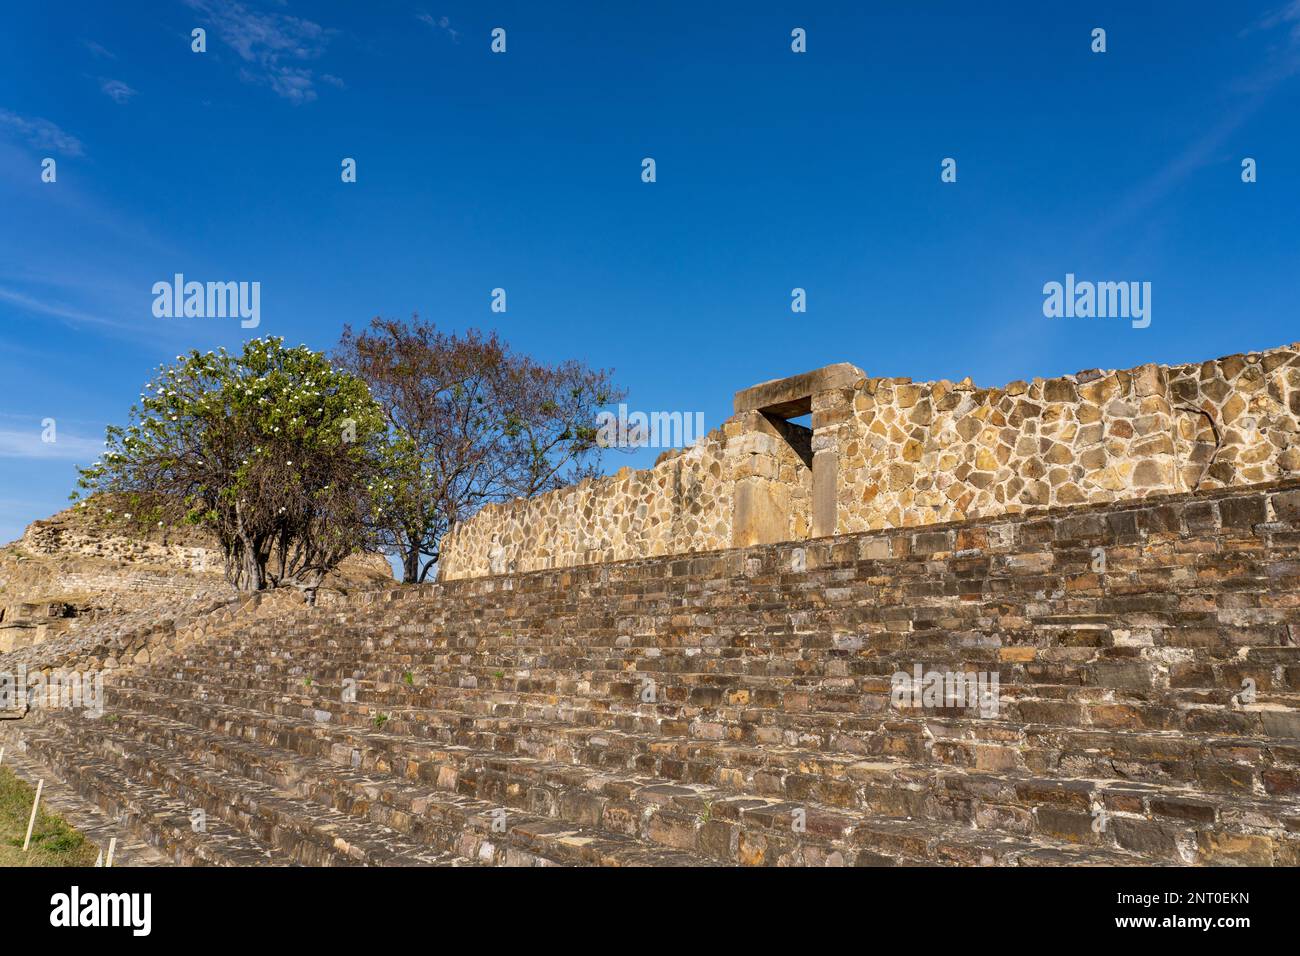 The Palace on the east side of the Main Plaza  in the pre-Hispanic Zapotec ruins of Monte Alban in Oaxaca, Mexico.  At left is a cazuaate or Tree Morn Stock Photo